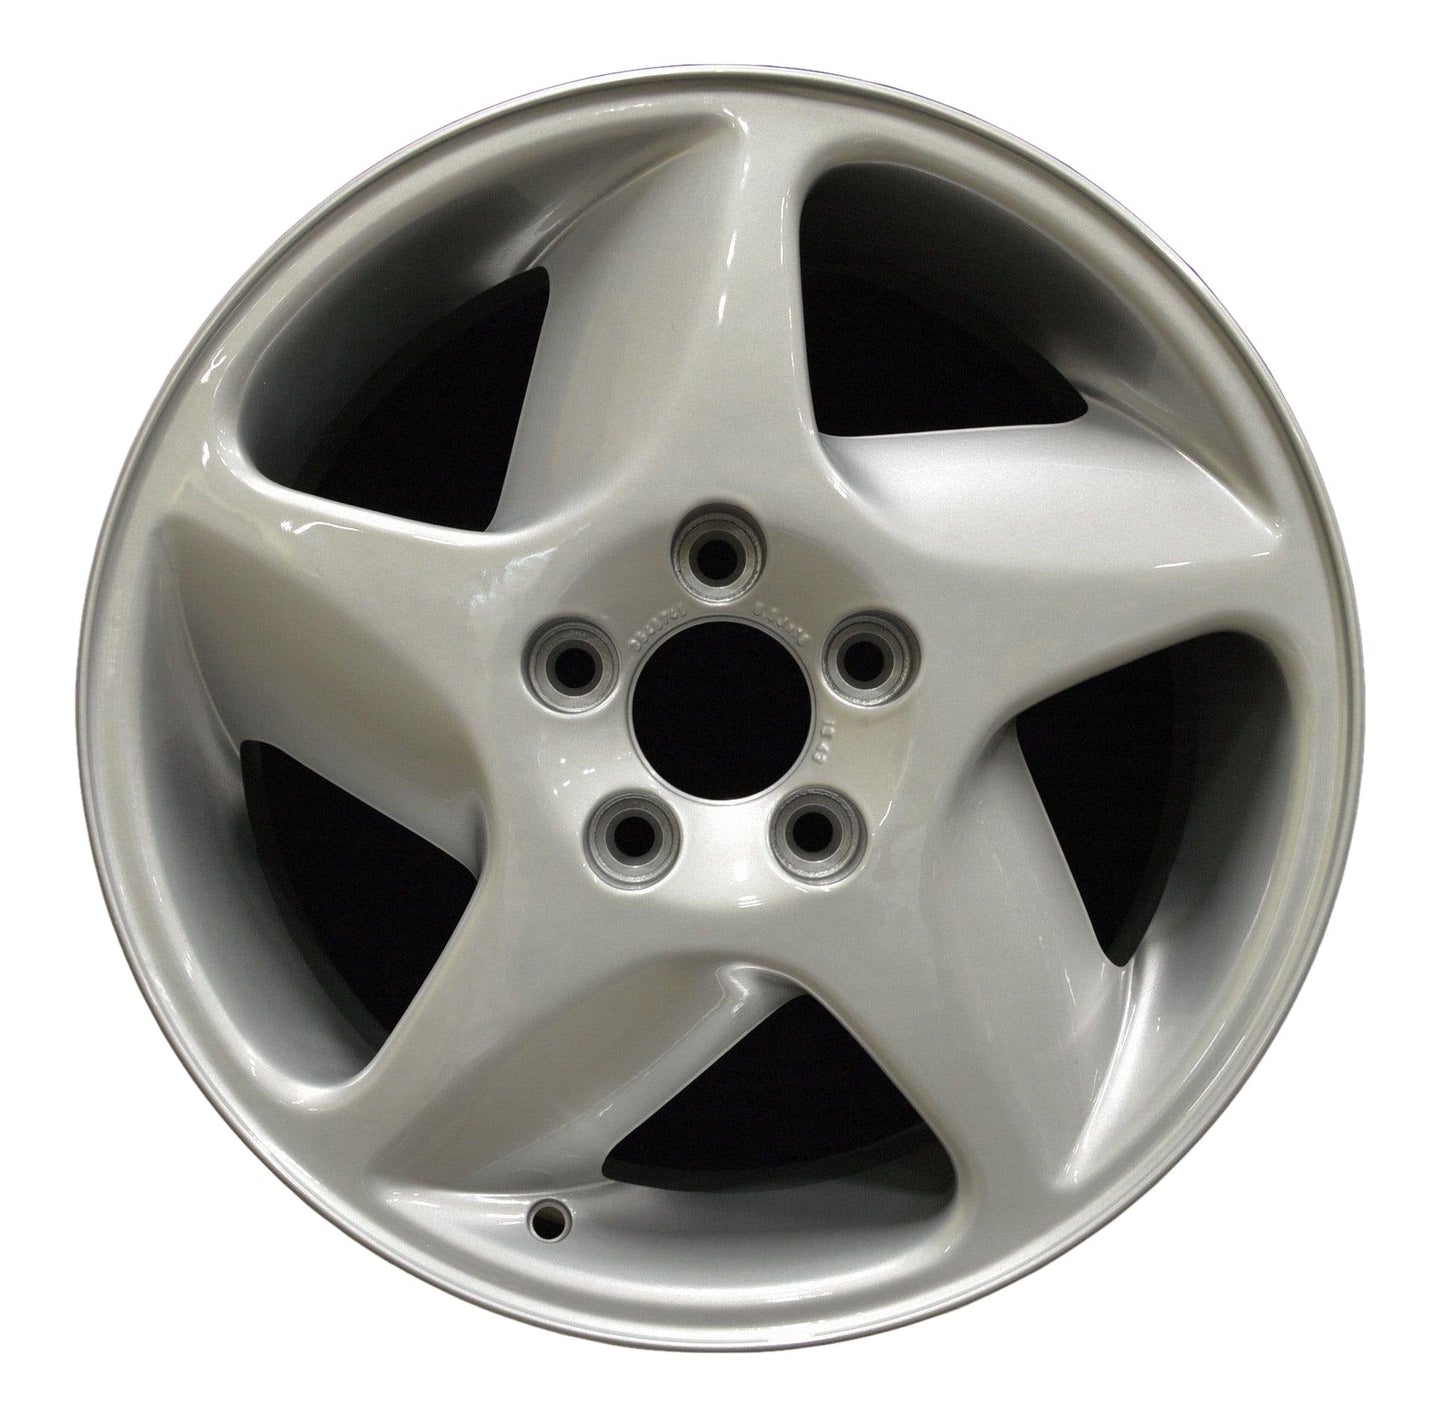 Volvo 850  1994, 1995, 1996, 1997 Factory OEM Car Wheel Size 16x6.5 Alloy WAO.70372.PS05.FF